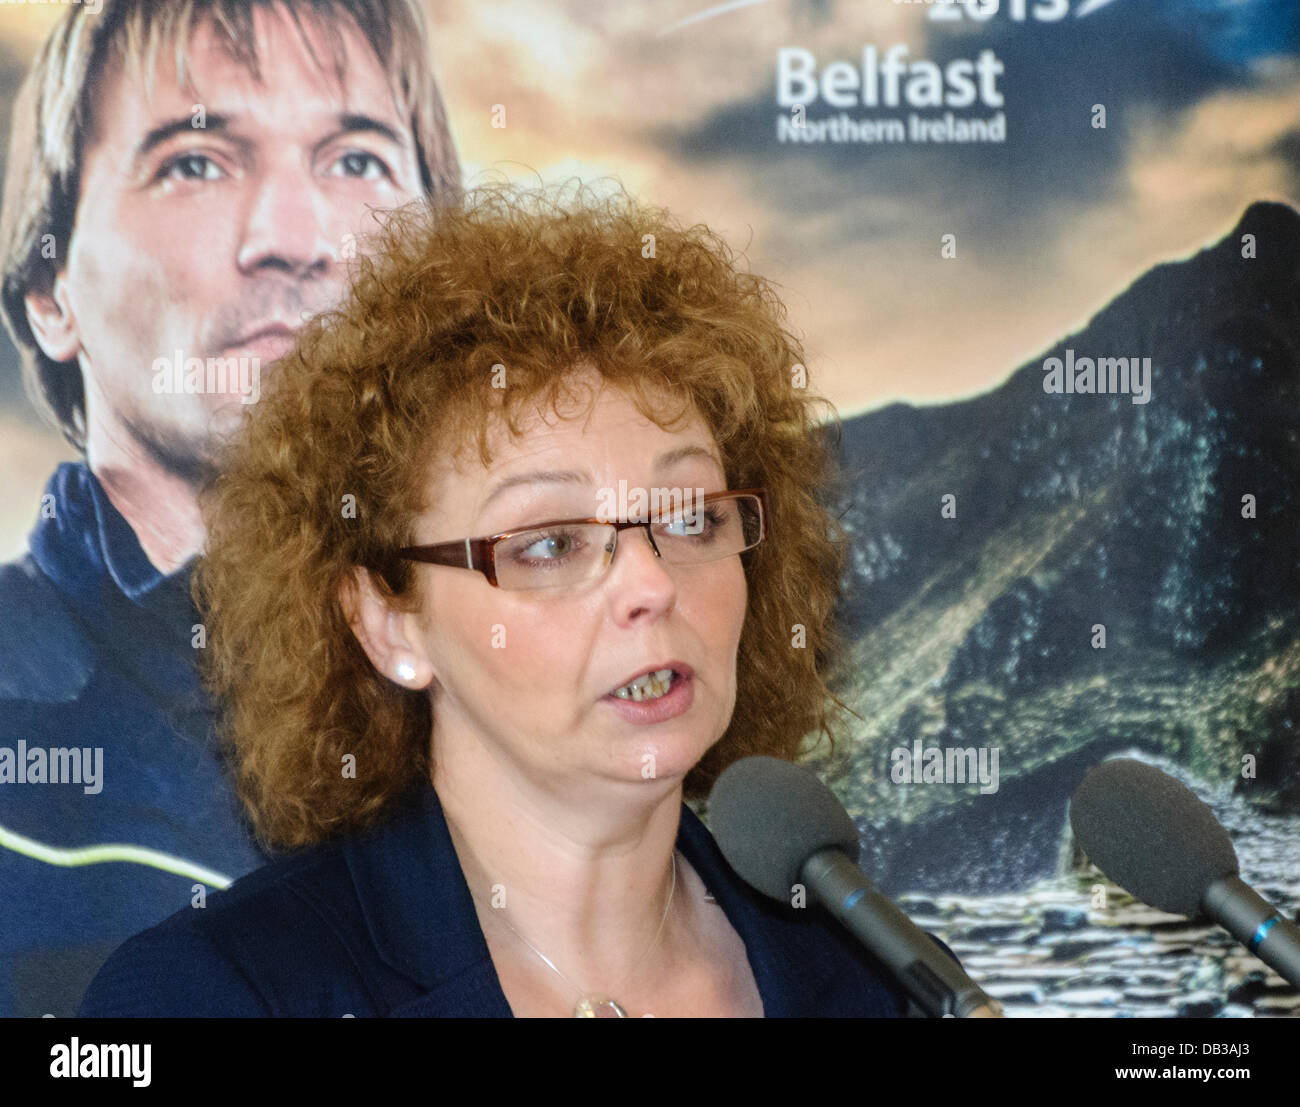 Belfast, Northern Ireland, 23rd July 2013 - Minister for Culture, Arts and Leisure Caral Ni Chuilin MLA (Sinn Fein) opens the WPFG media launch Credit:  Stephen Barnes/Alamy Live News Stock Photo